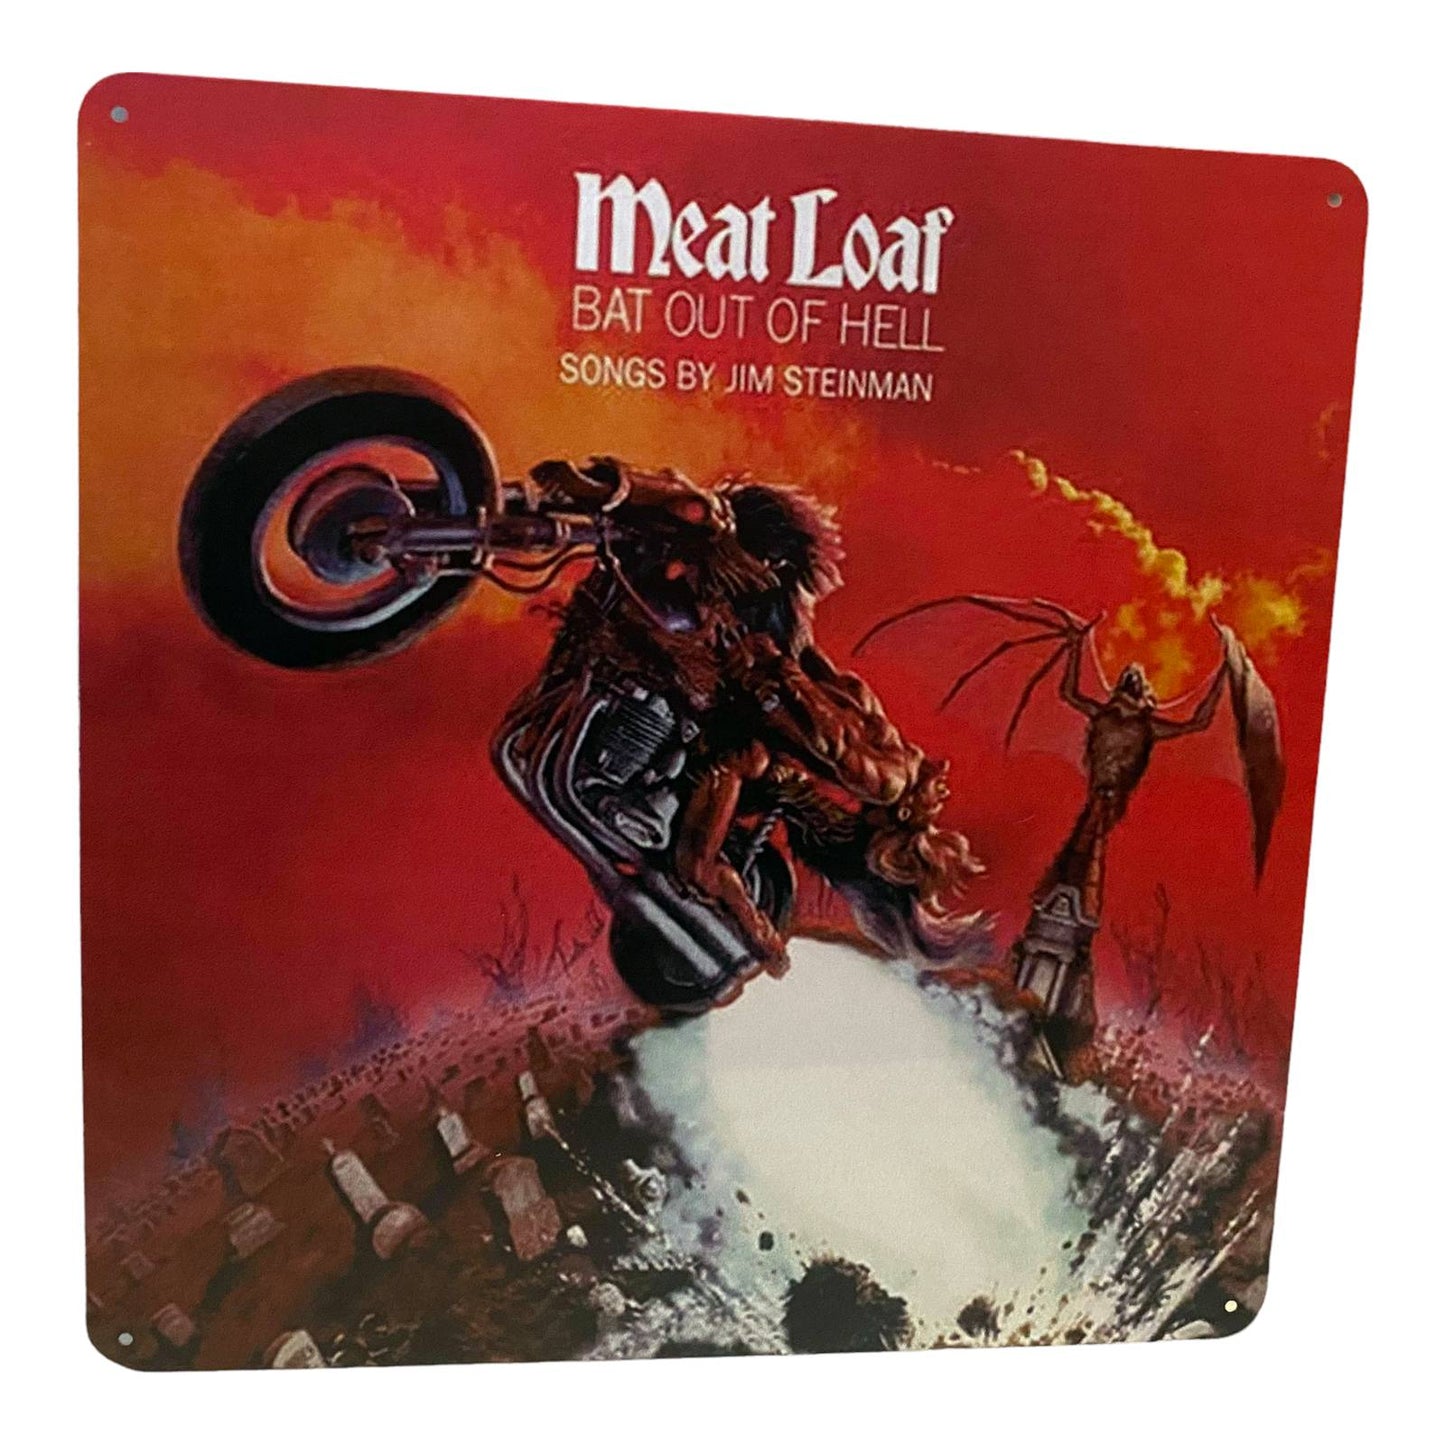 Meatloaf - Bat Out of Hell Album Cover Metal Print Tin Sign 12"x 12"